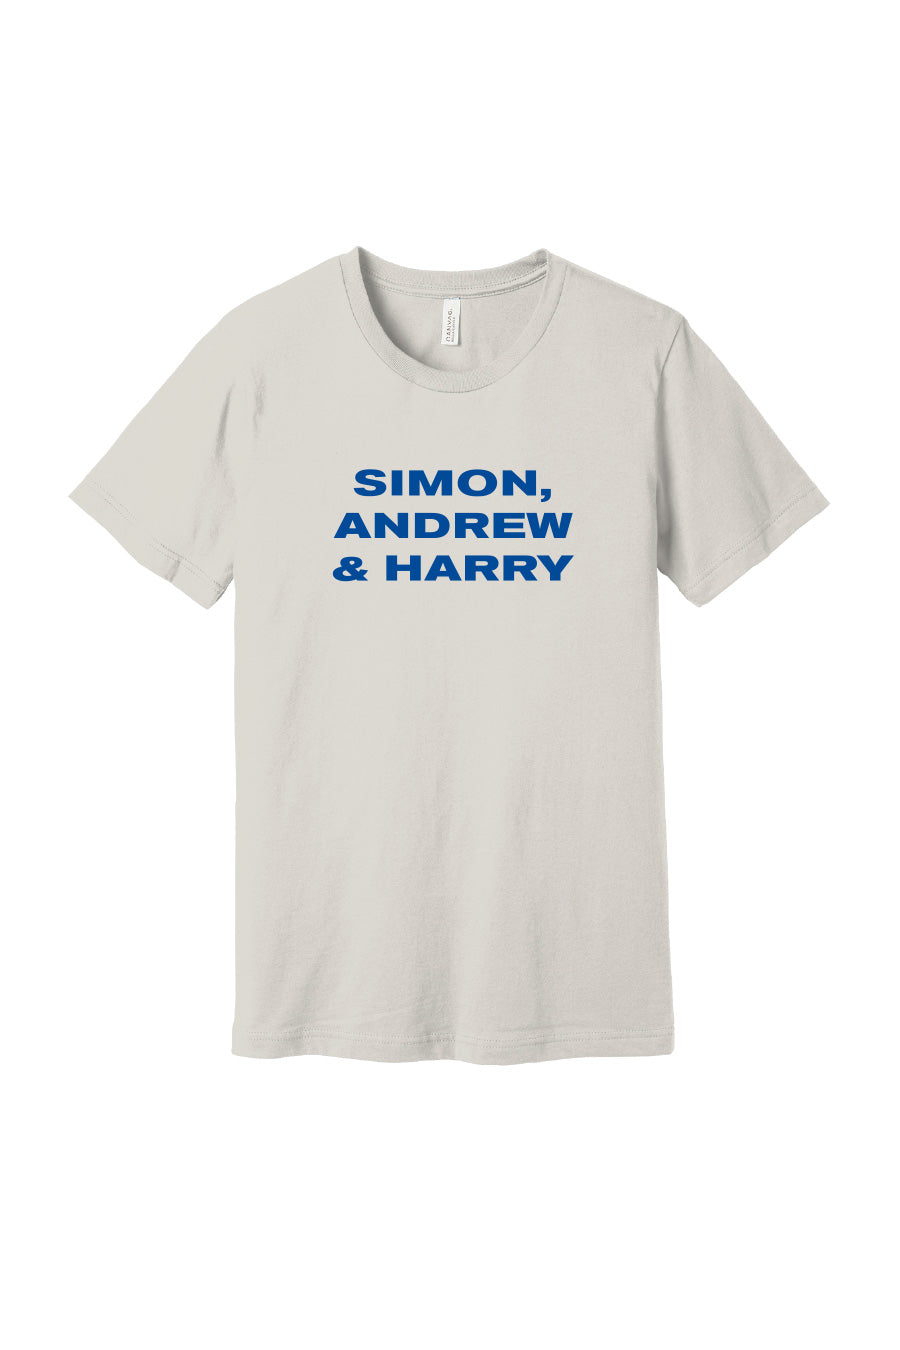 Founder's Names Tee